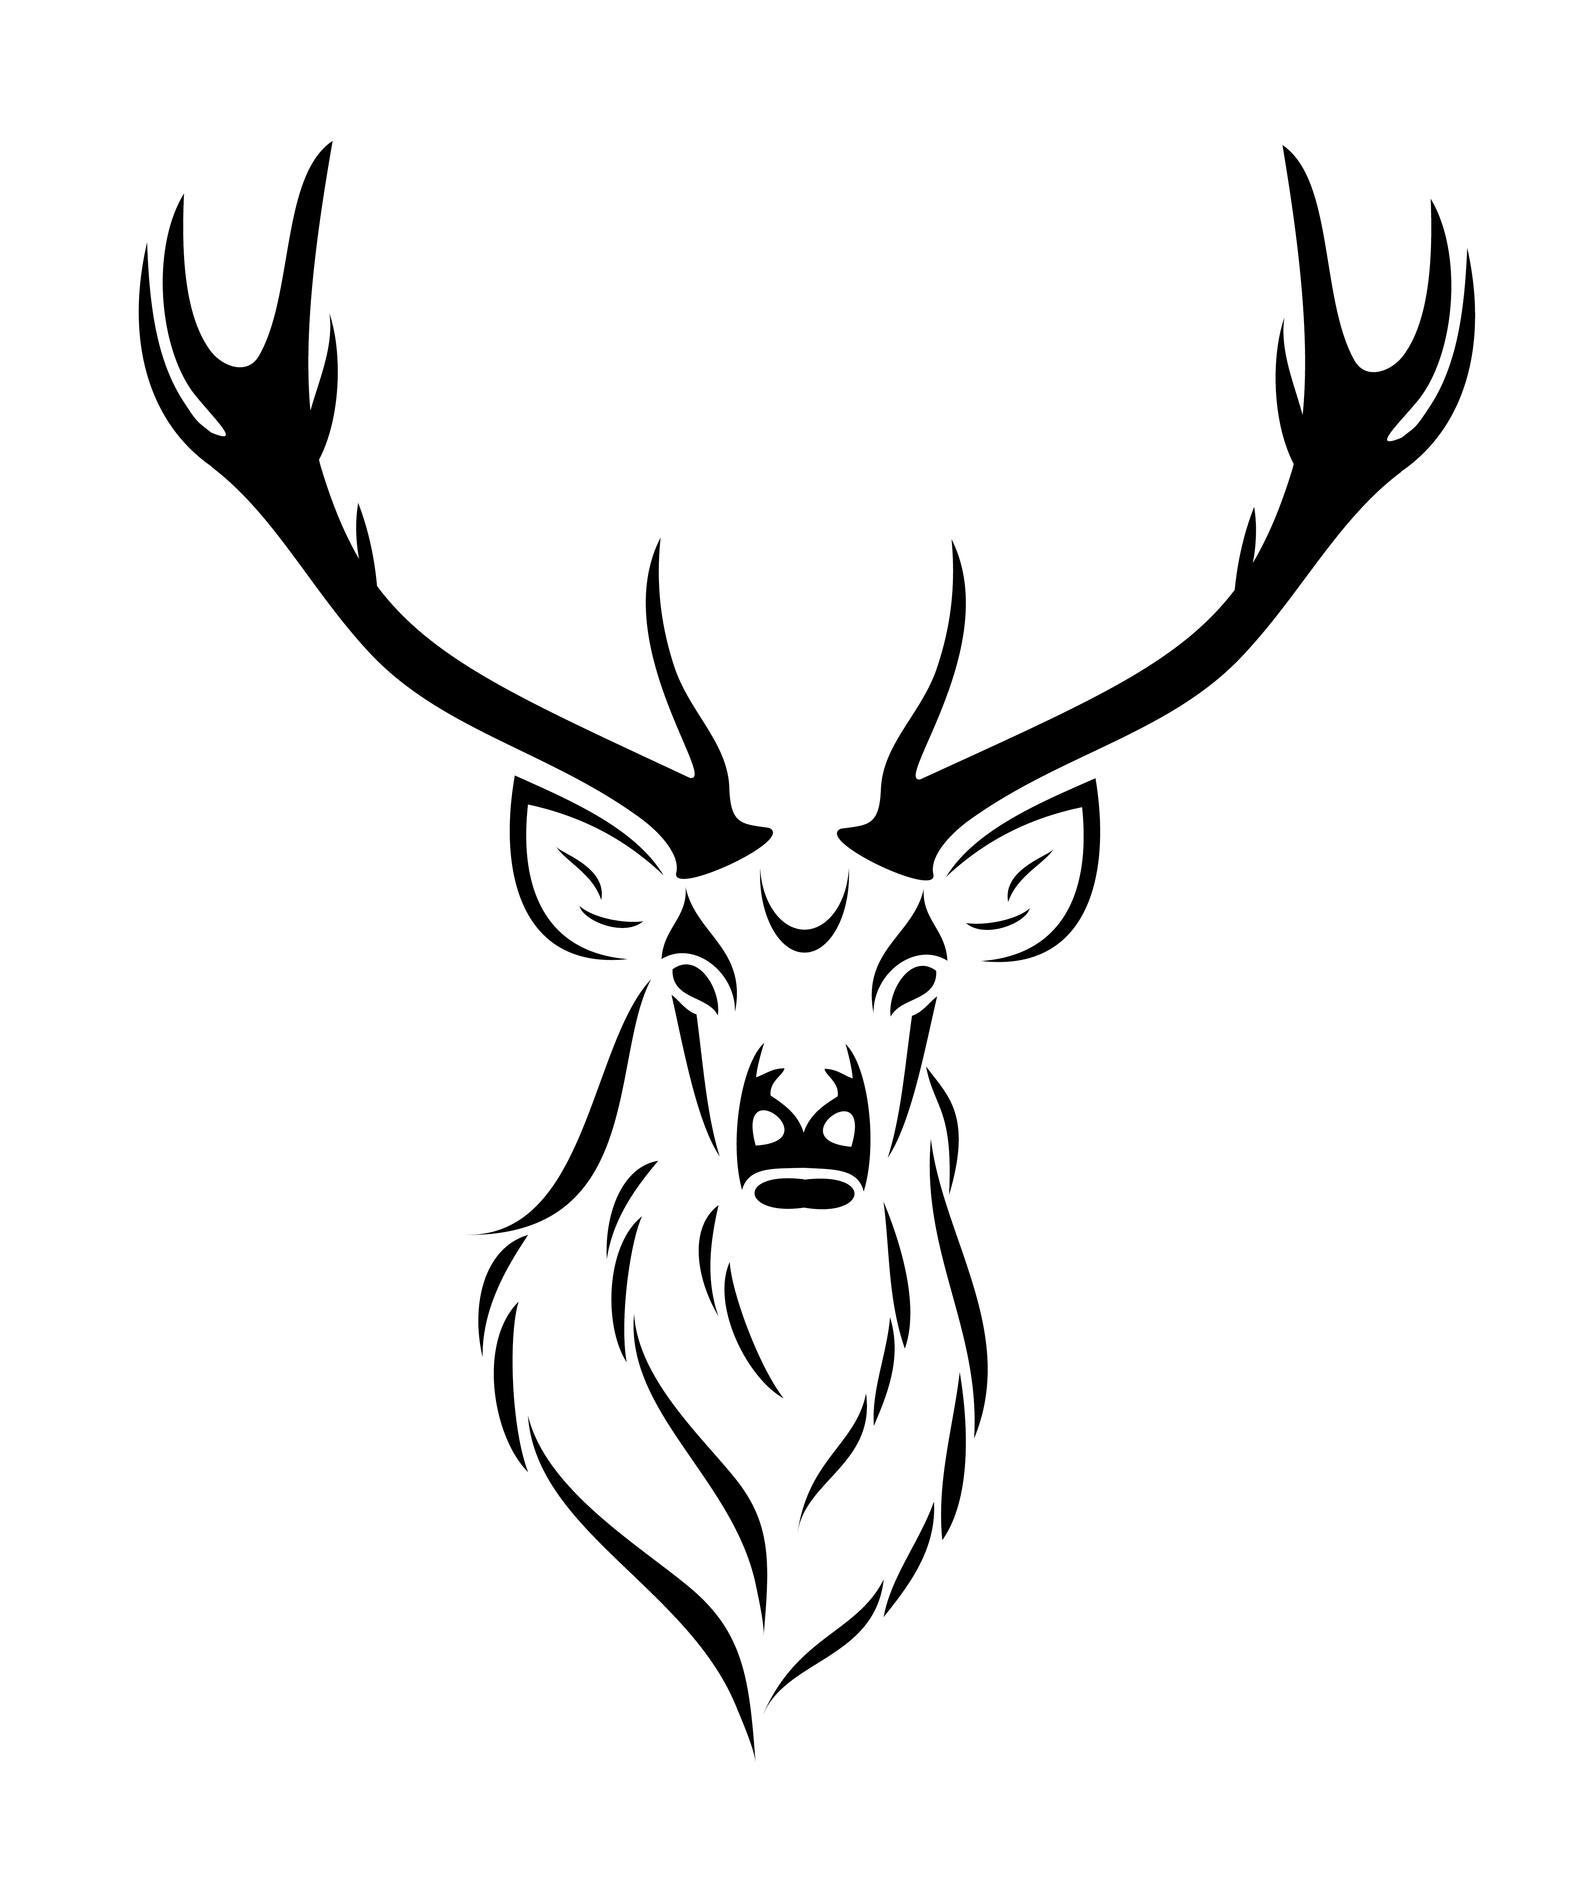 Animal How To Draw Deer Skull Sketch for Adult